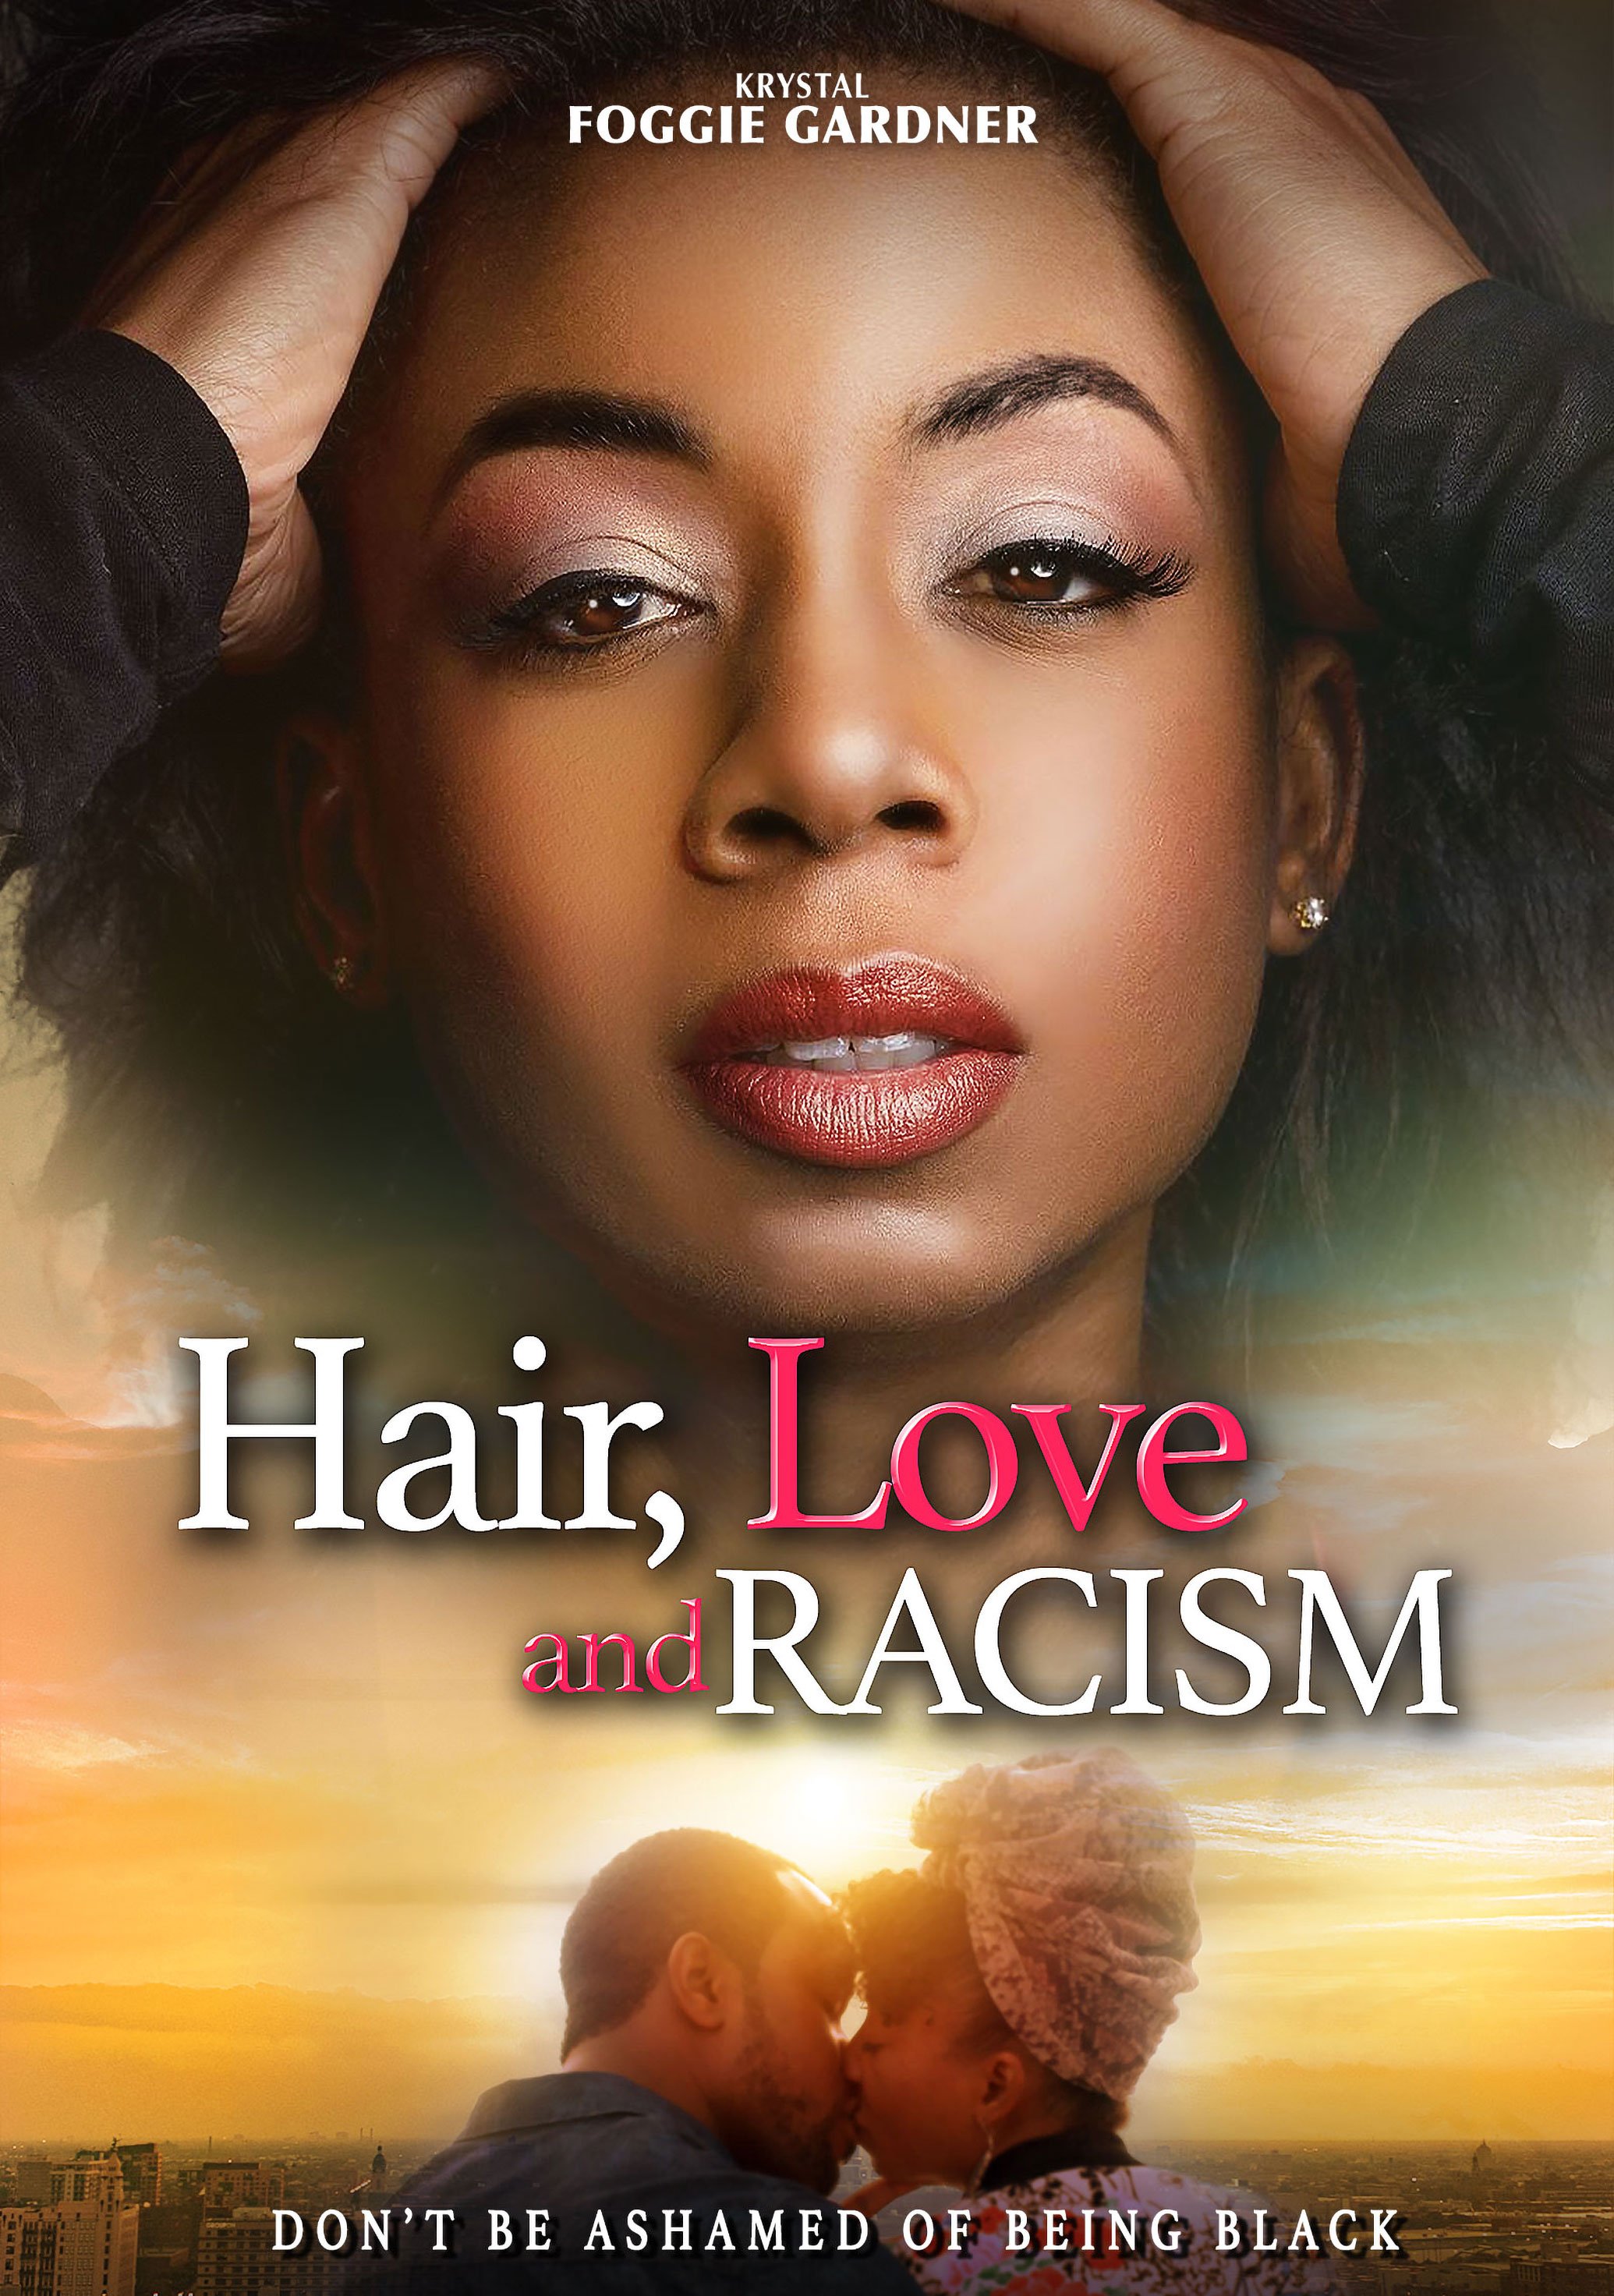 Hair Love and Racism